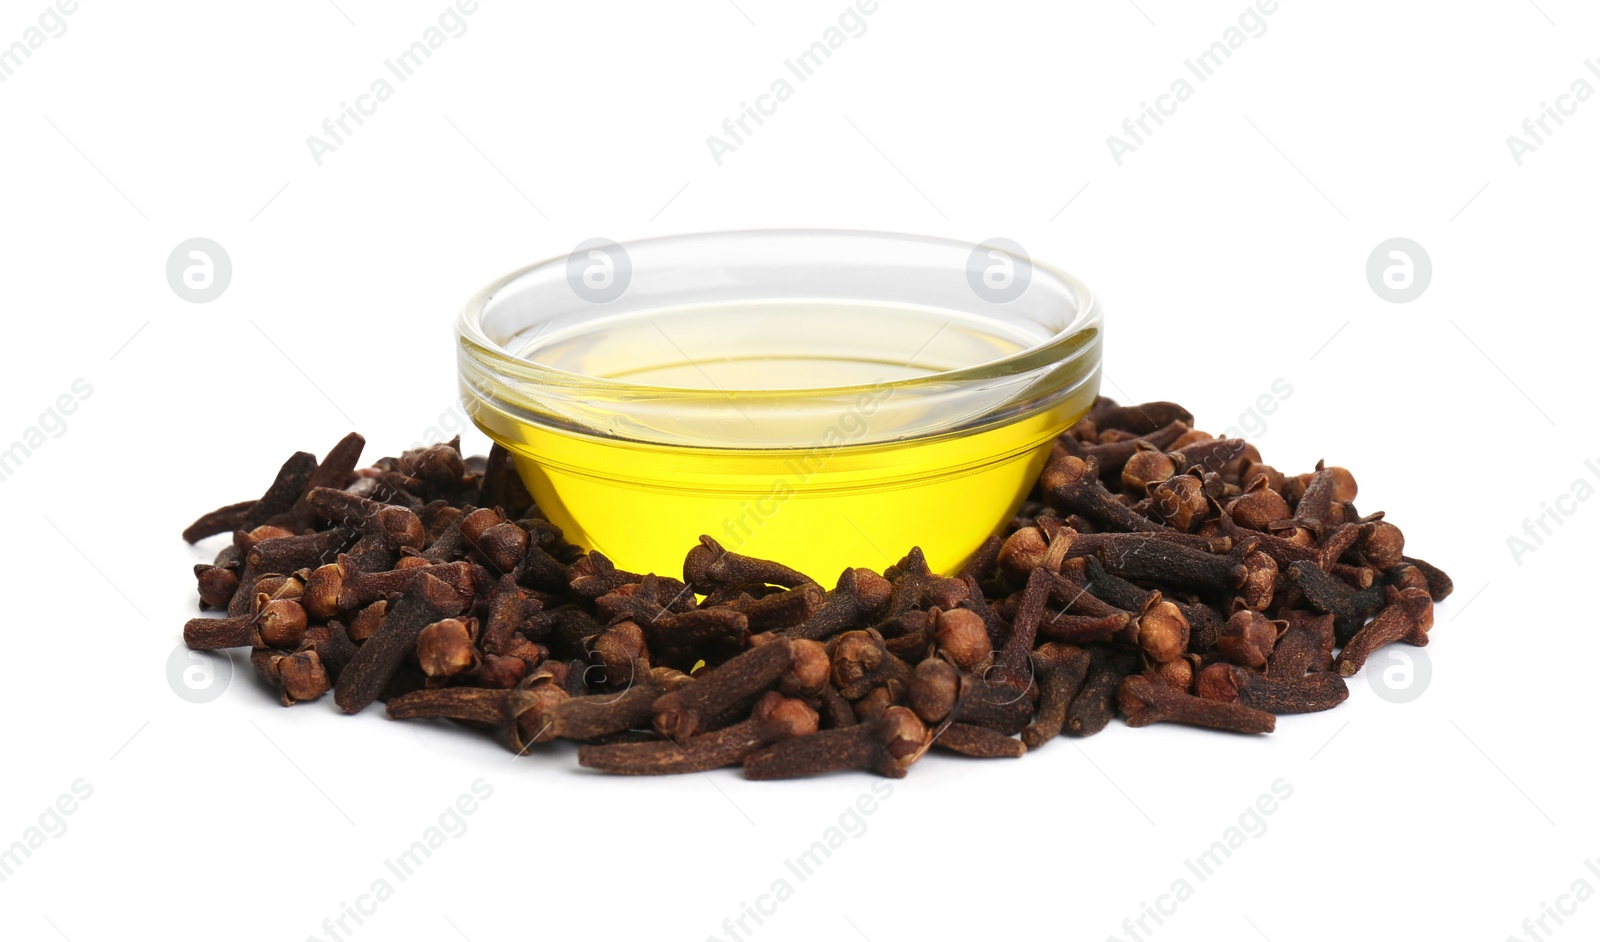 Photo of Essential oil and dried cloves on white background